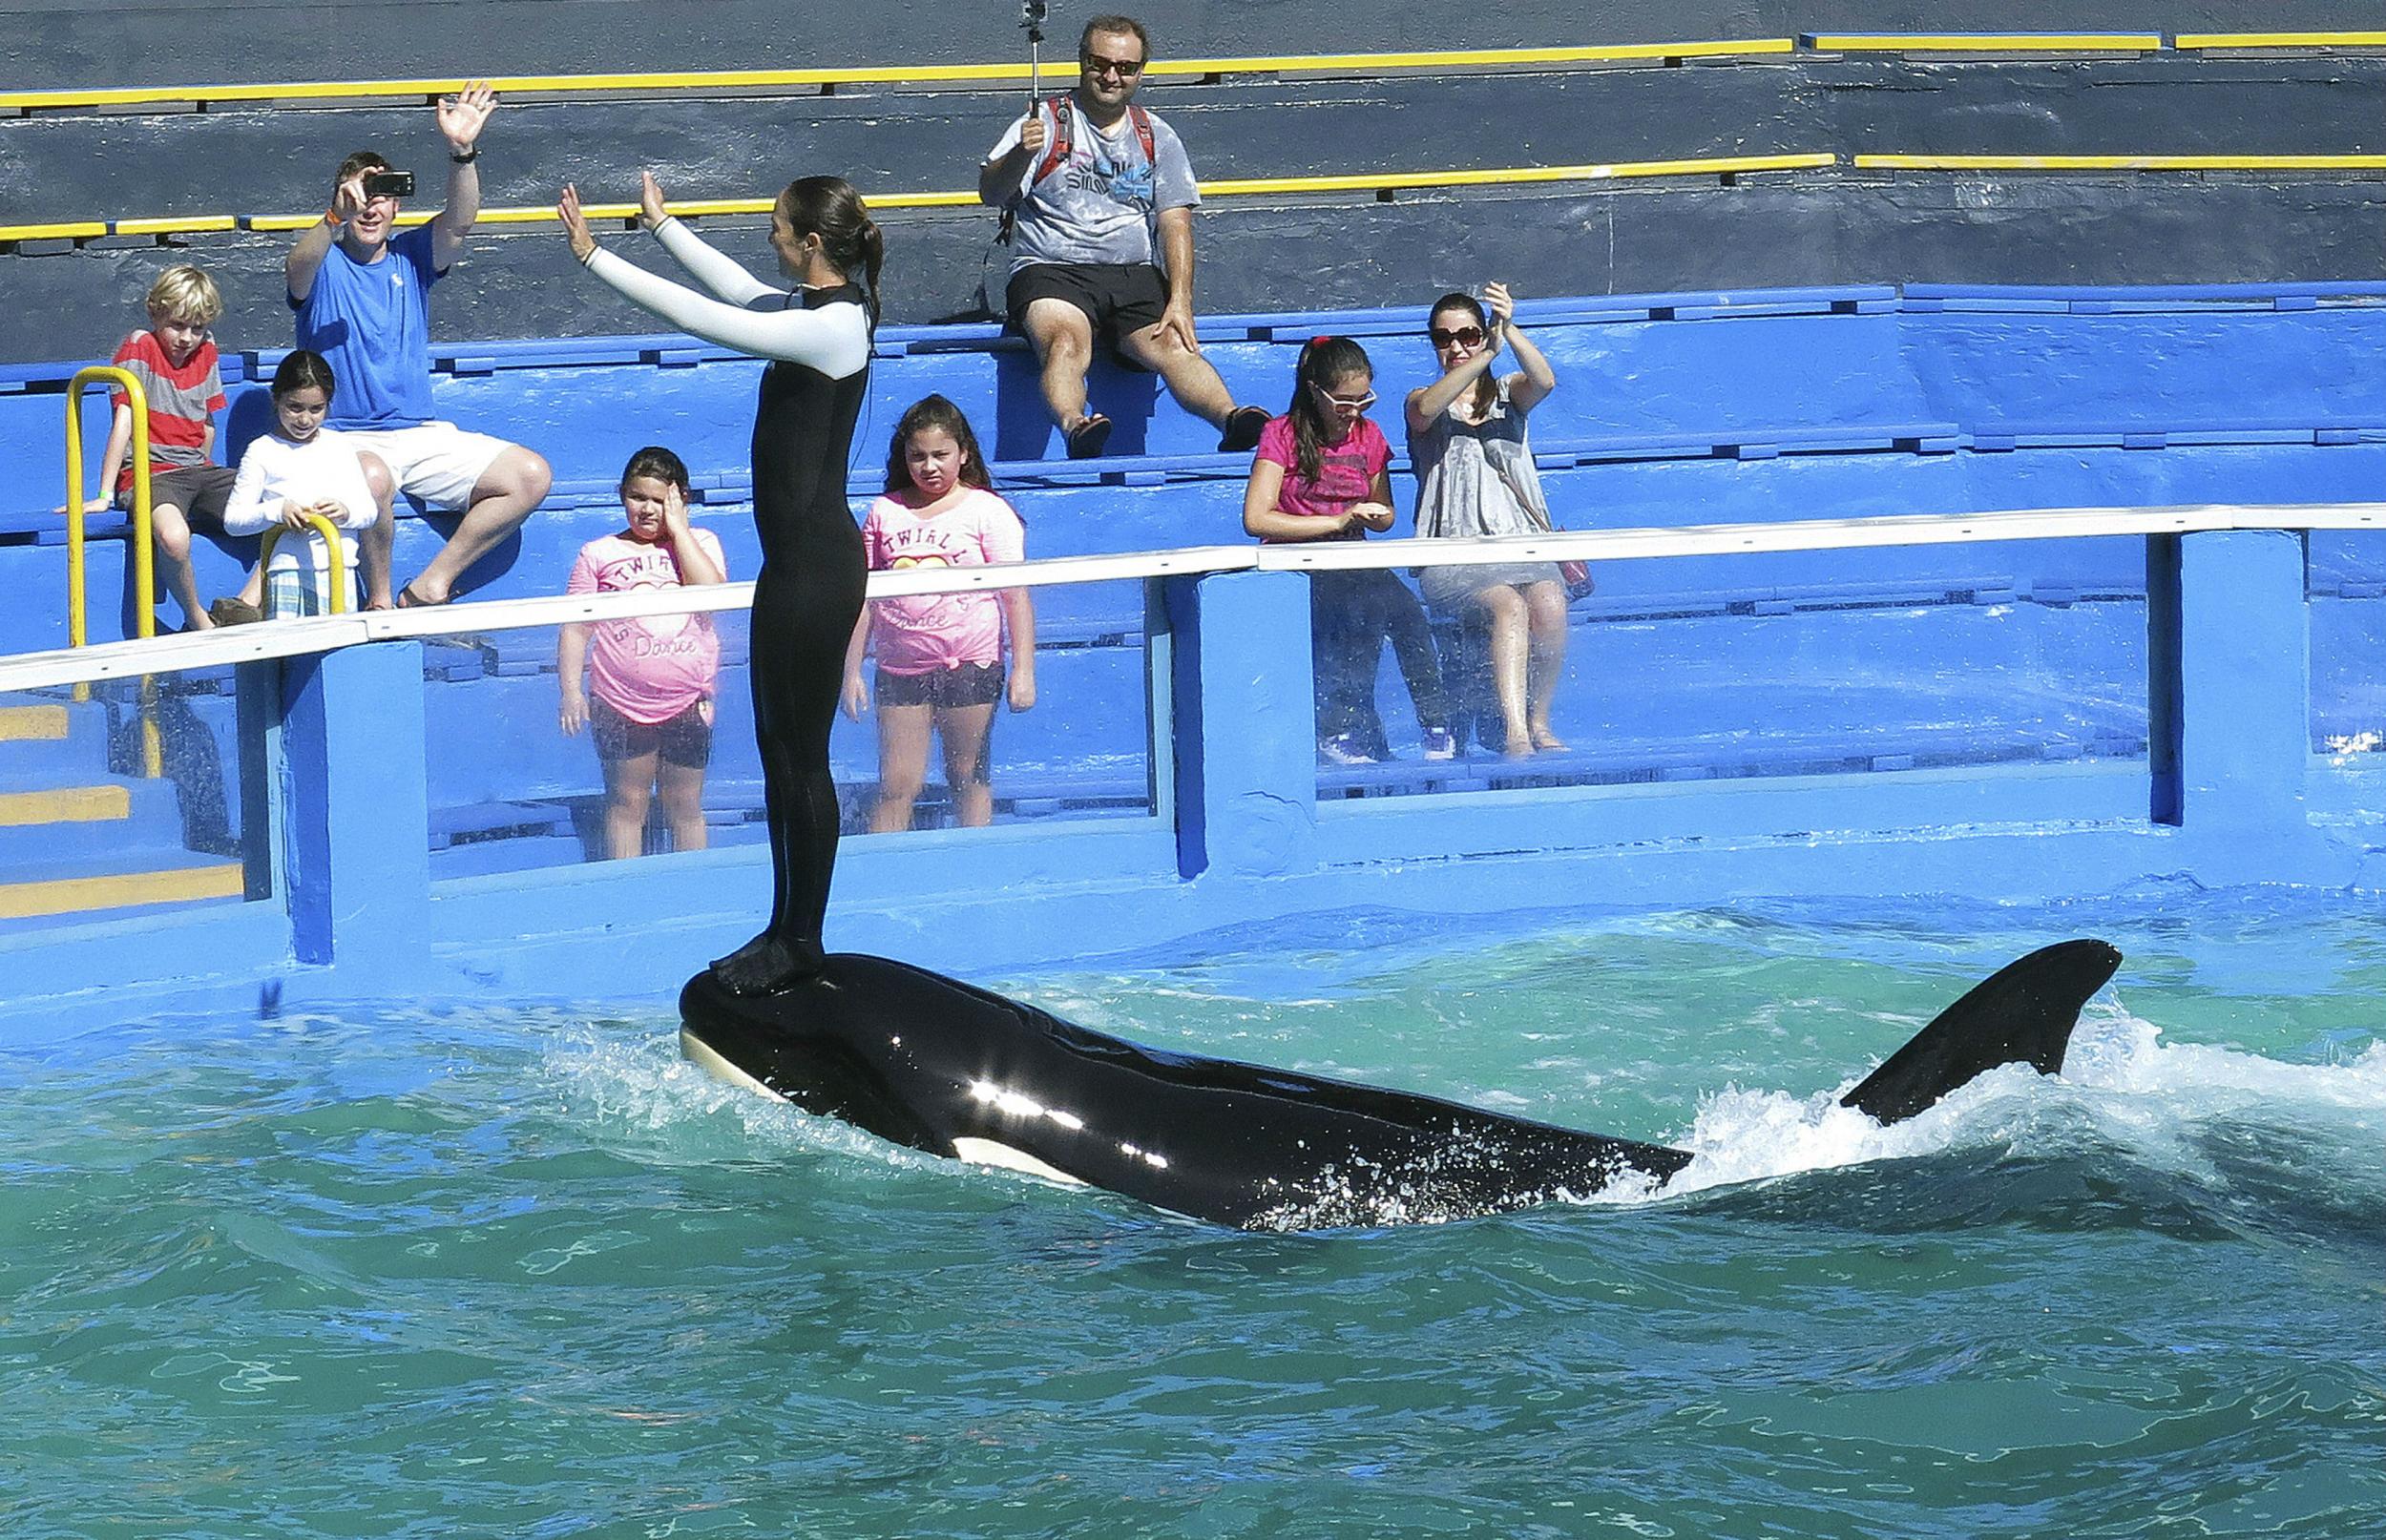 Every day, twice a day, Lolita is made to perform stunts for visitors